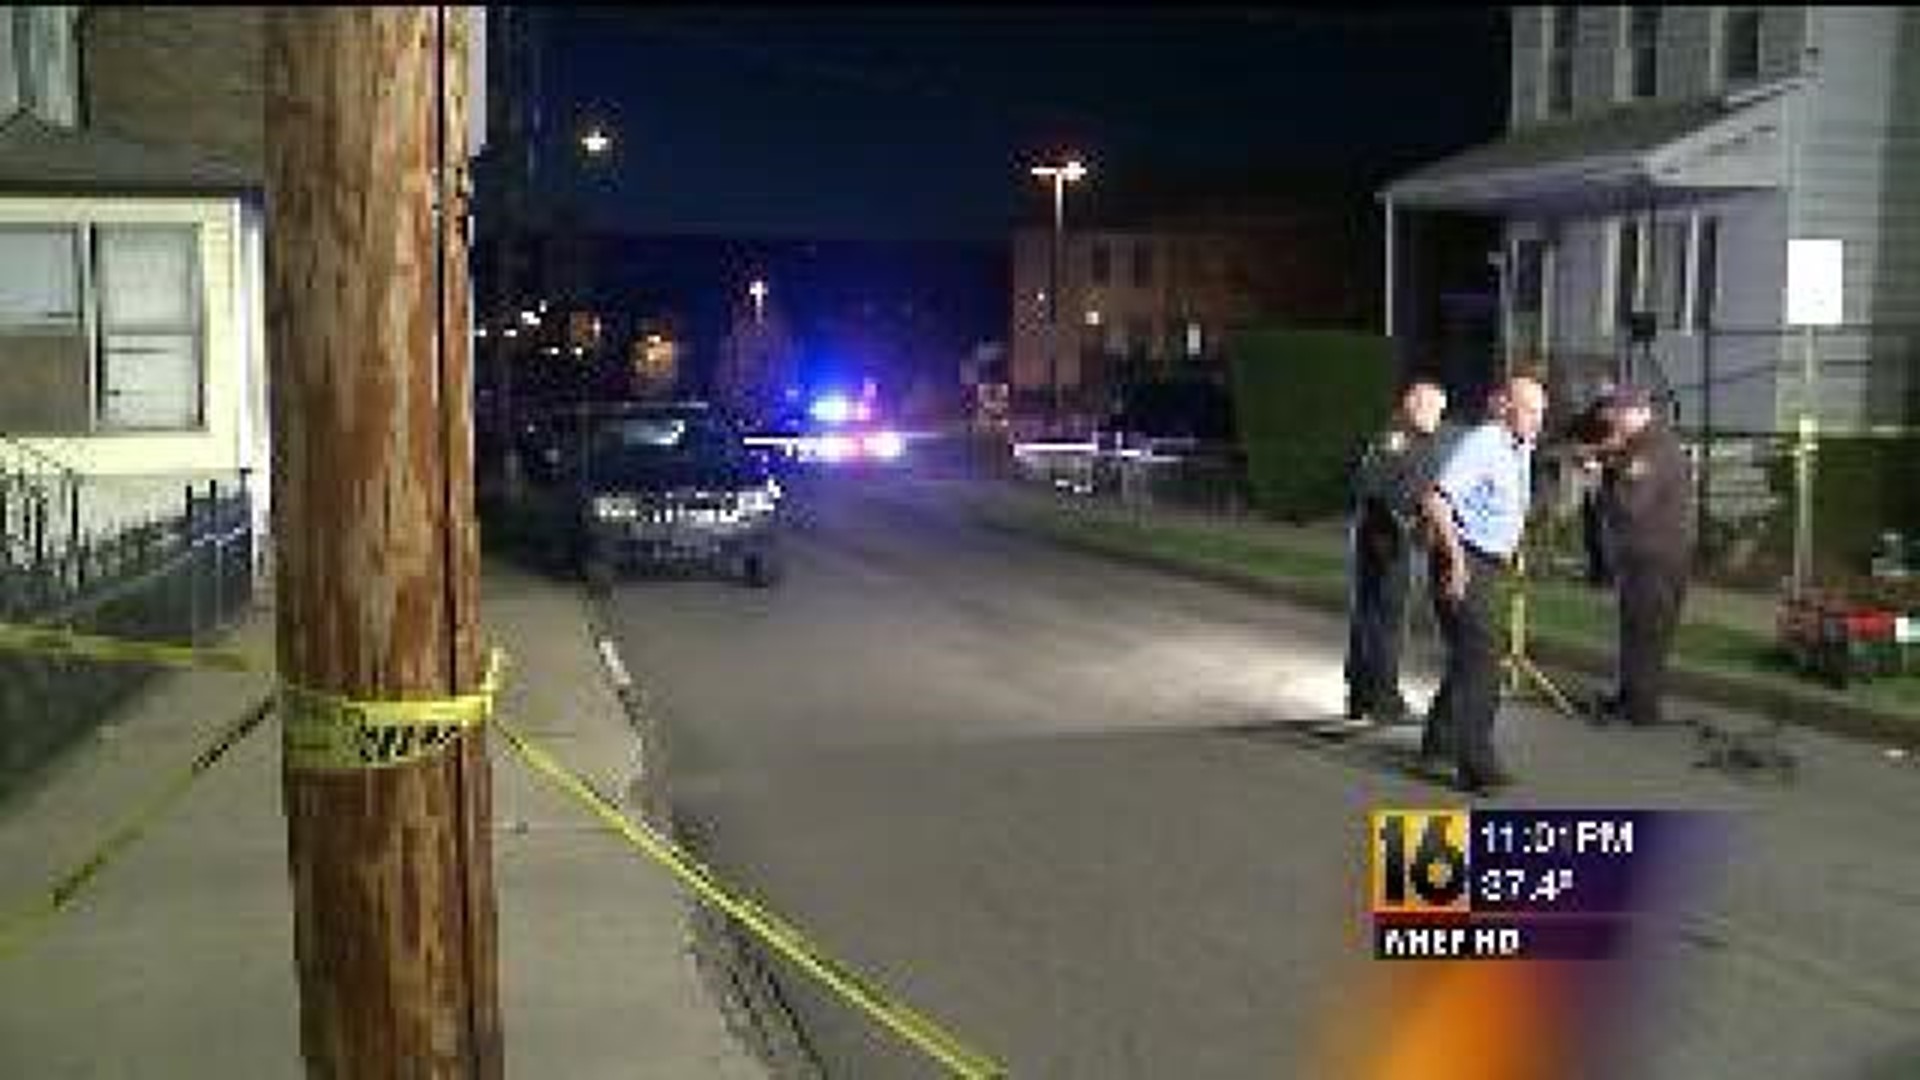 Teen Shot and Killed in Wilkes-Barre